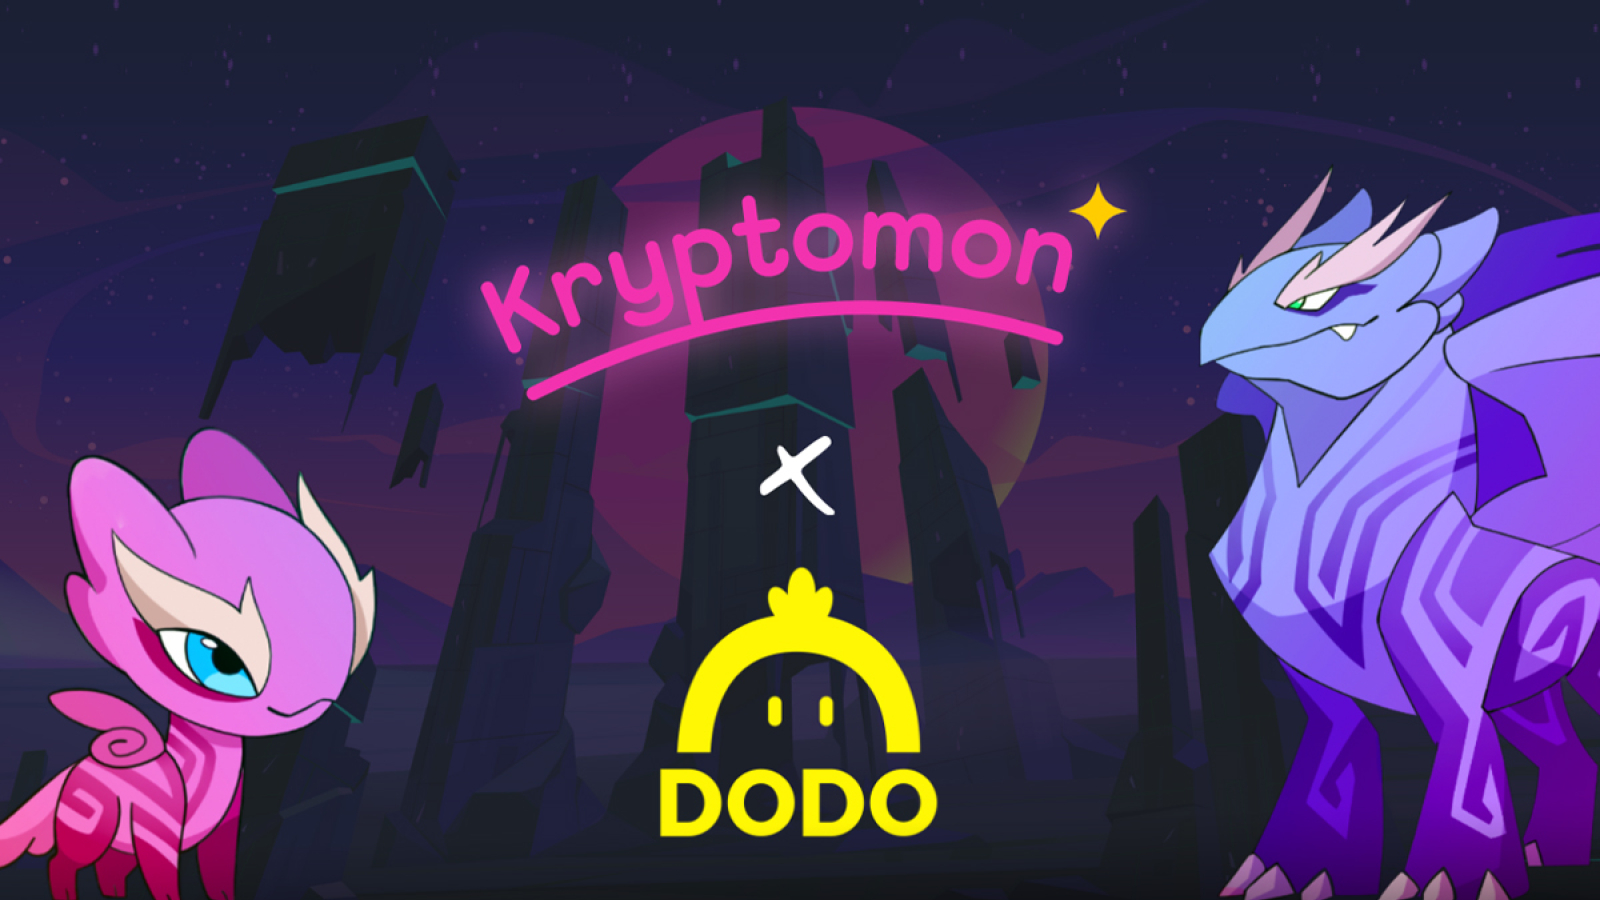 Kryptomon, the Highly Anticipated NFT Game, Partners with DODO to Unveil Its KMON-BNB Liquidity Mining Campaign